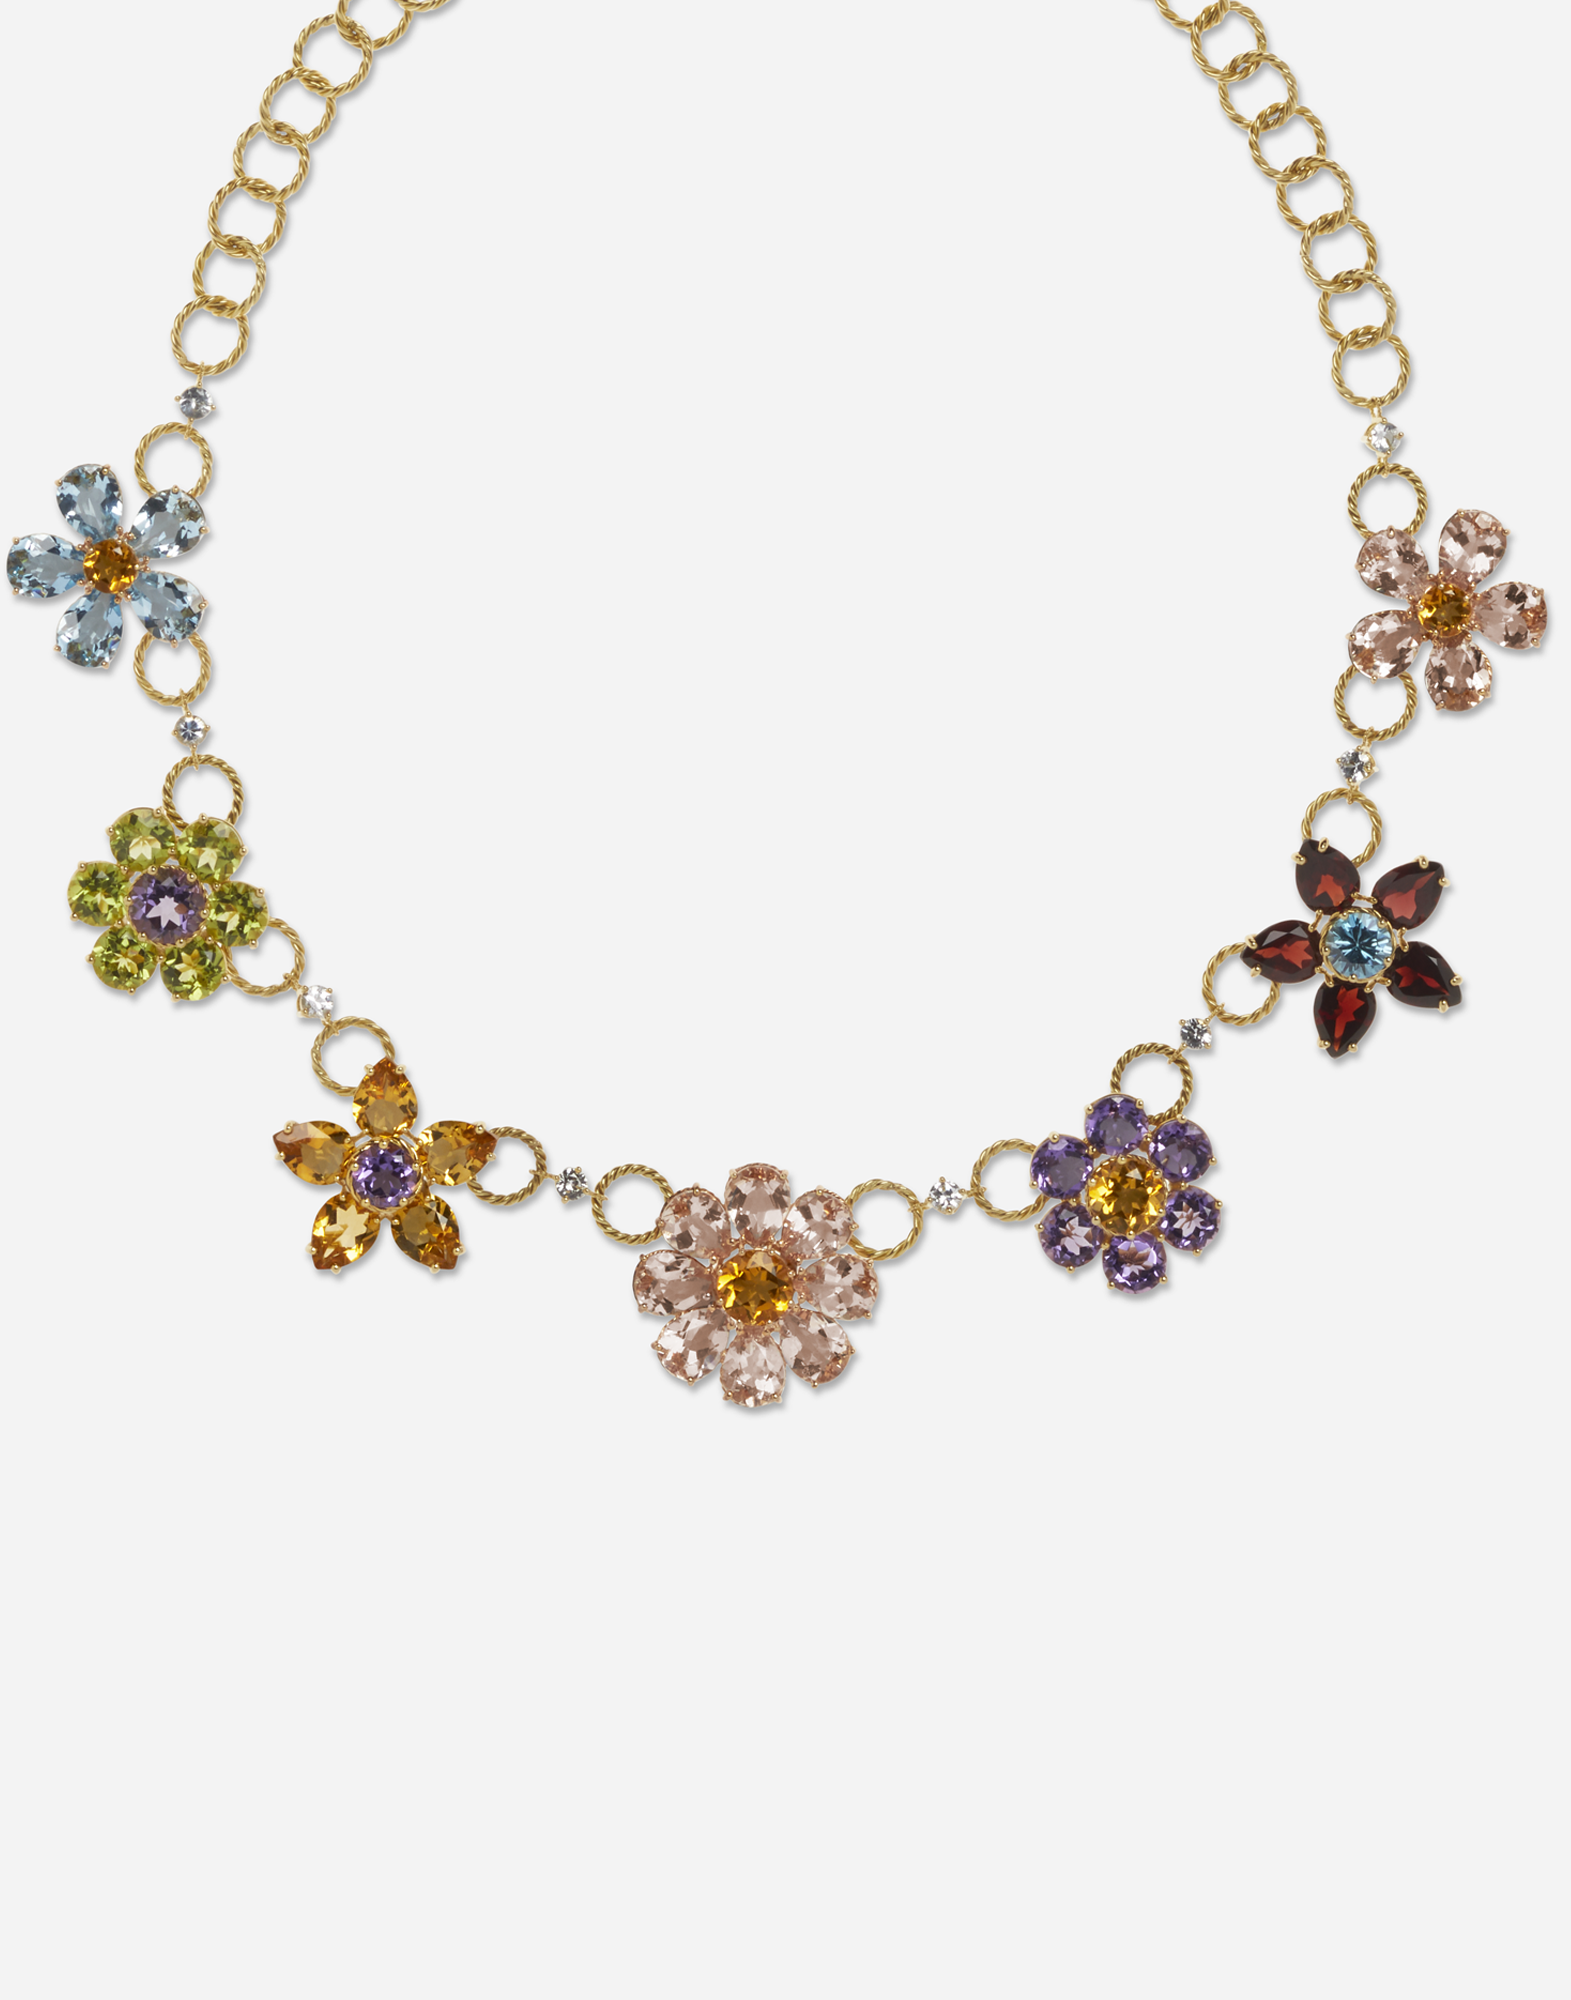 Women's Jewellery | Dolce&Gabbana - NECKLACE WITH FLORAL DECORATIVE ...